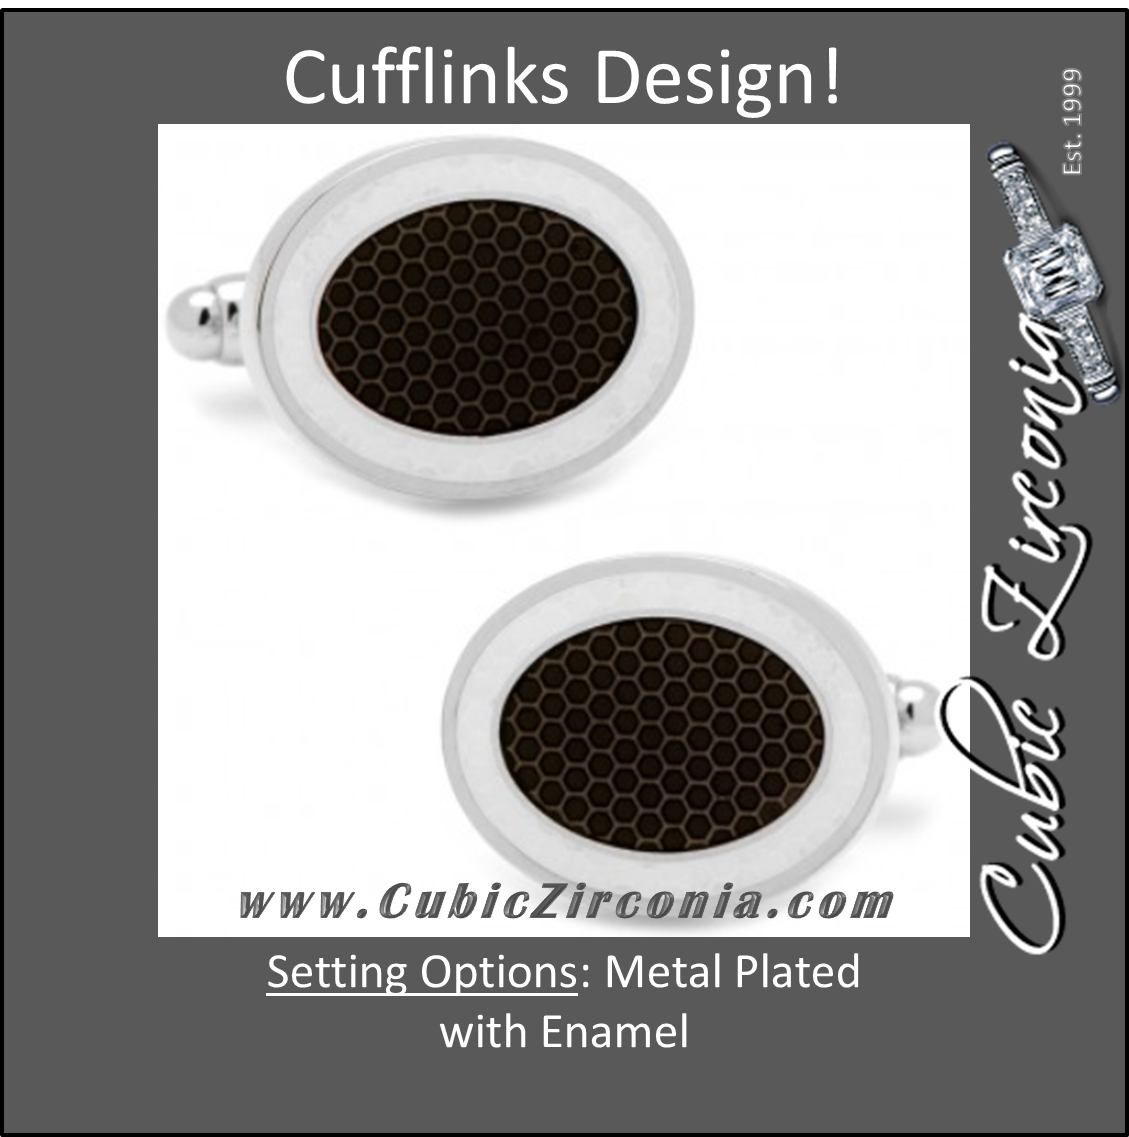 Men’s Cufflinks- Black and White Oval Outlines